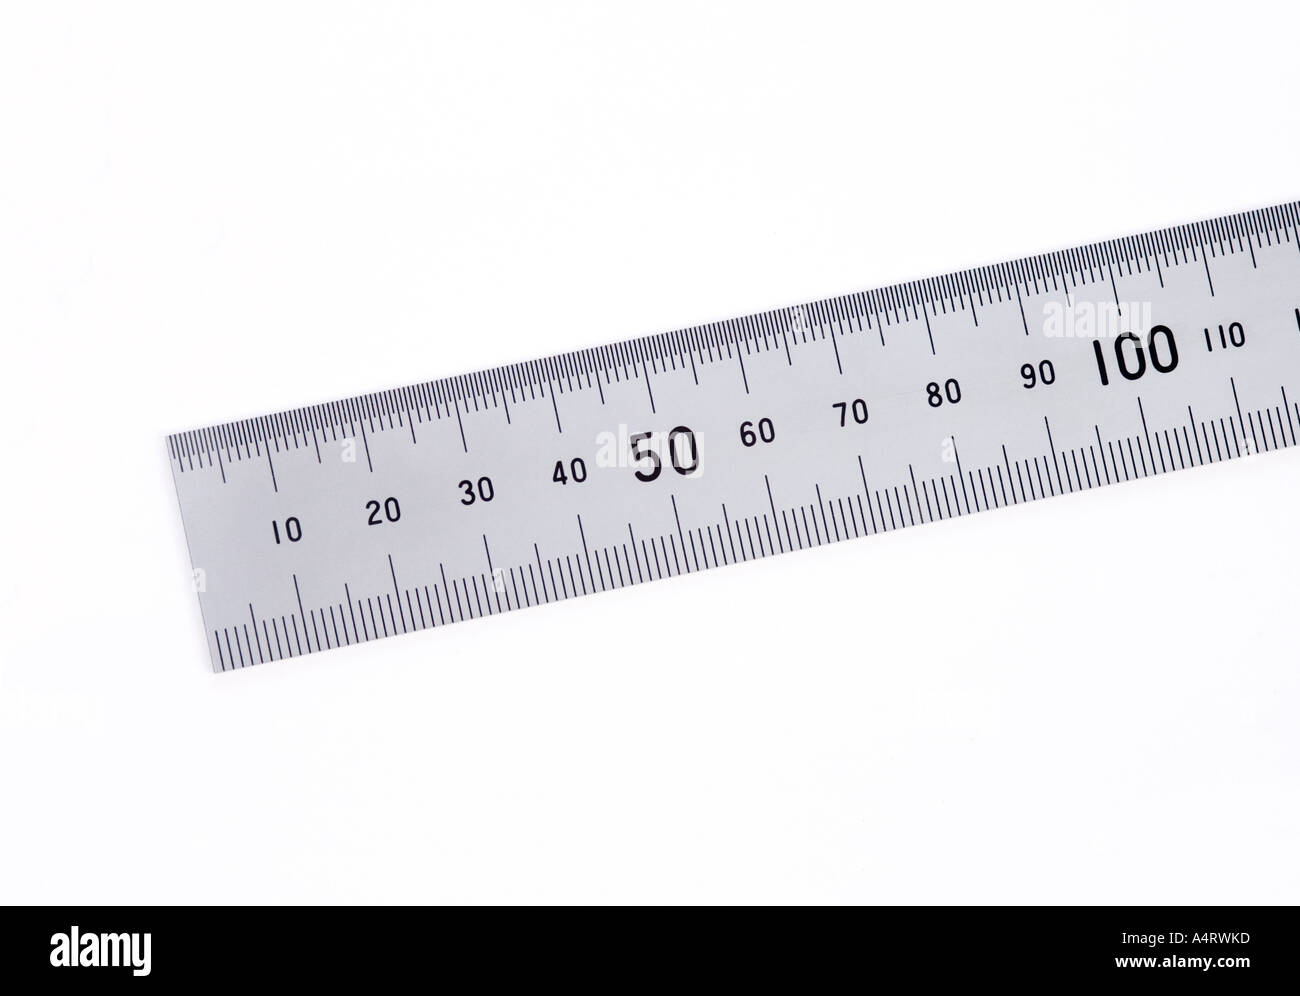 stainless steel ruler with metric markings Stock Photo